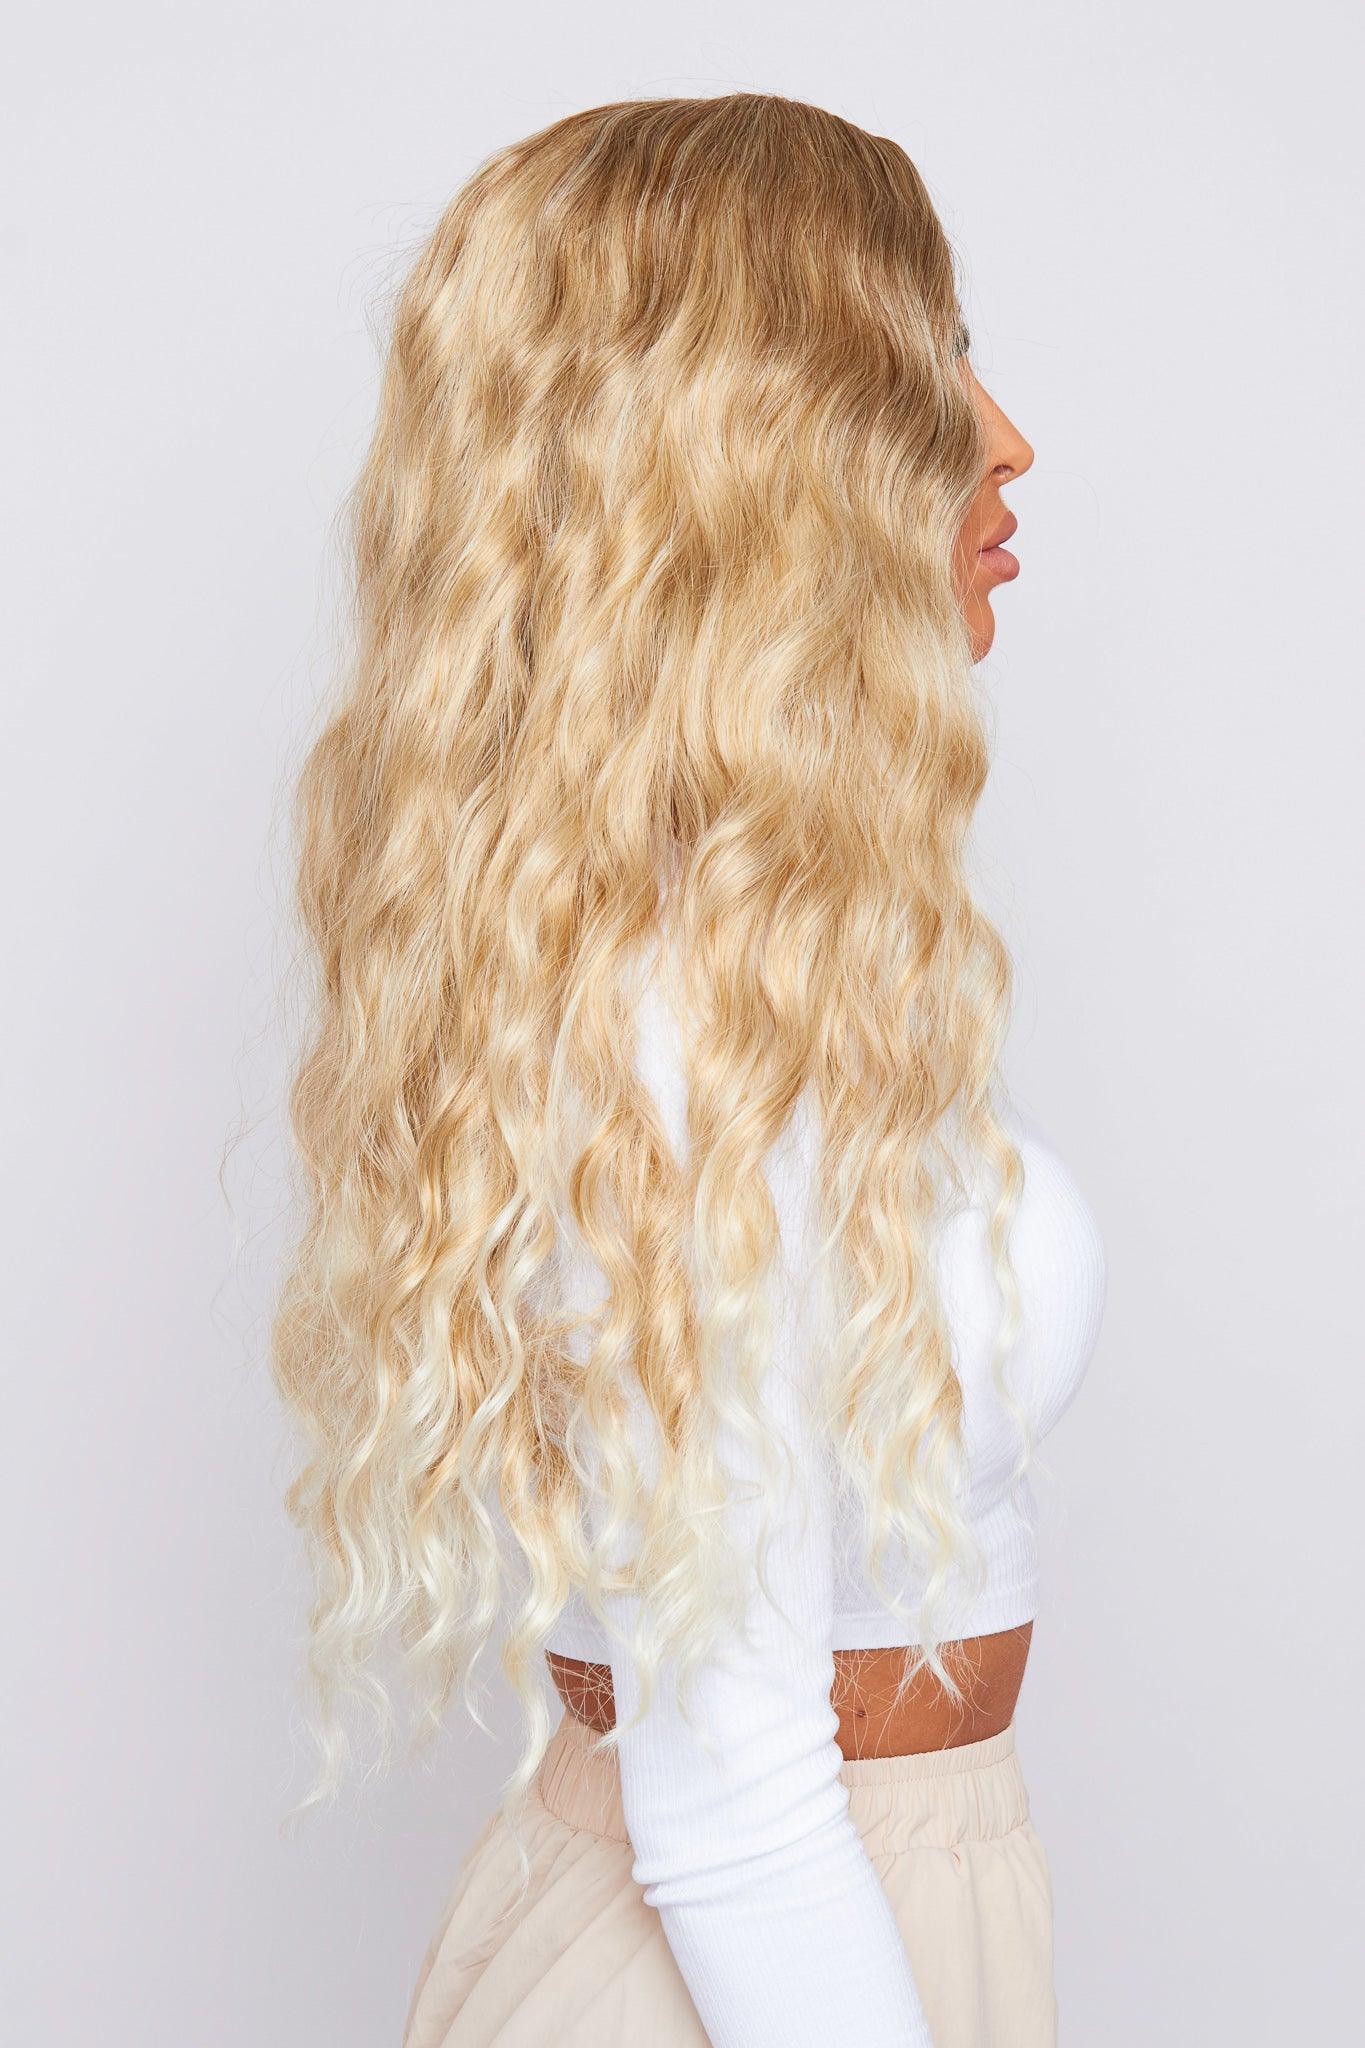 synthetic blonde curly hair wig from pbeauty hair being worn by model wearing a white top